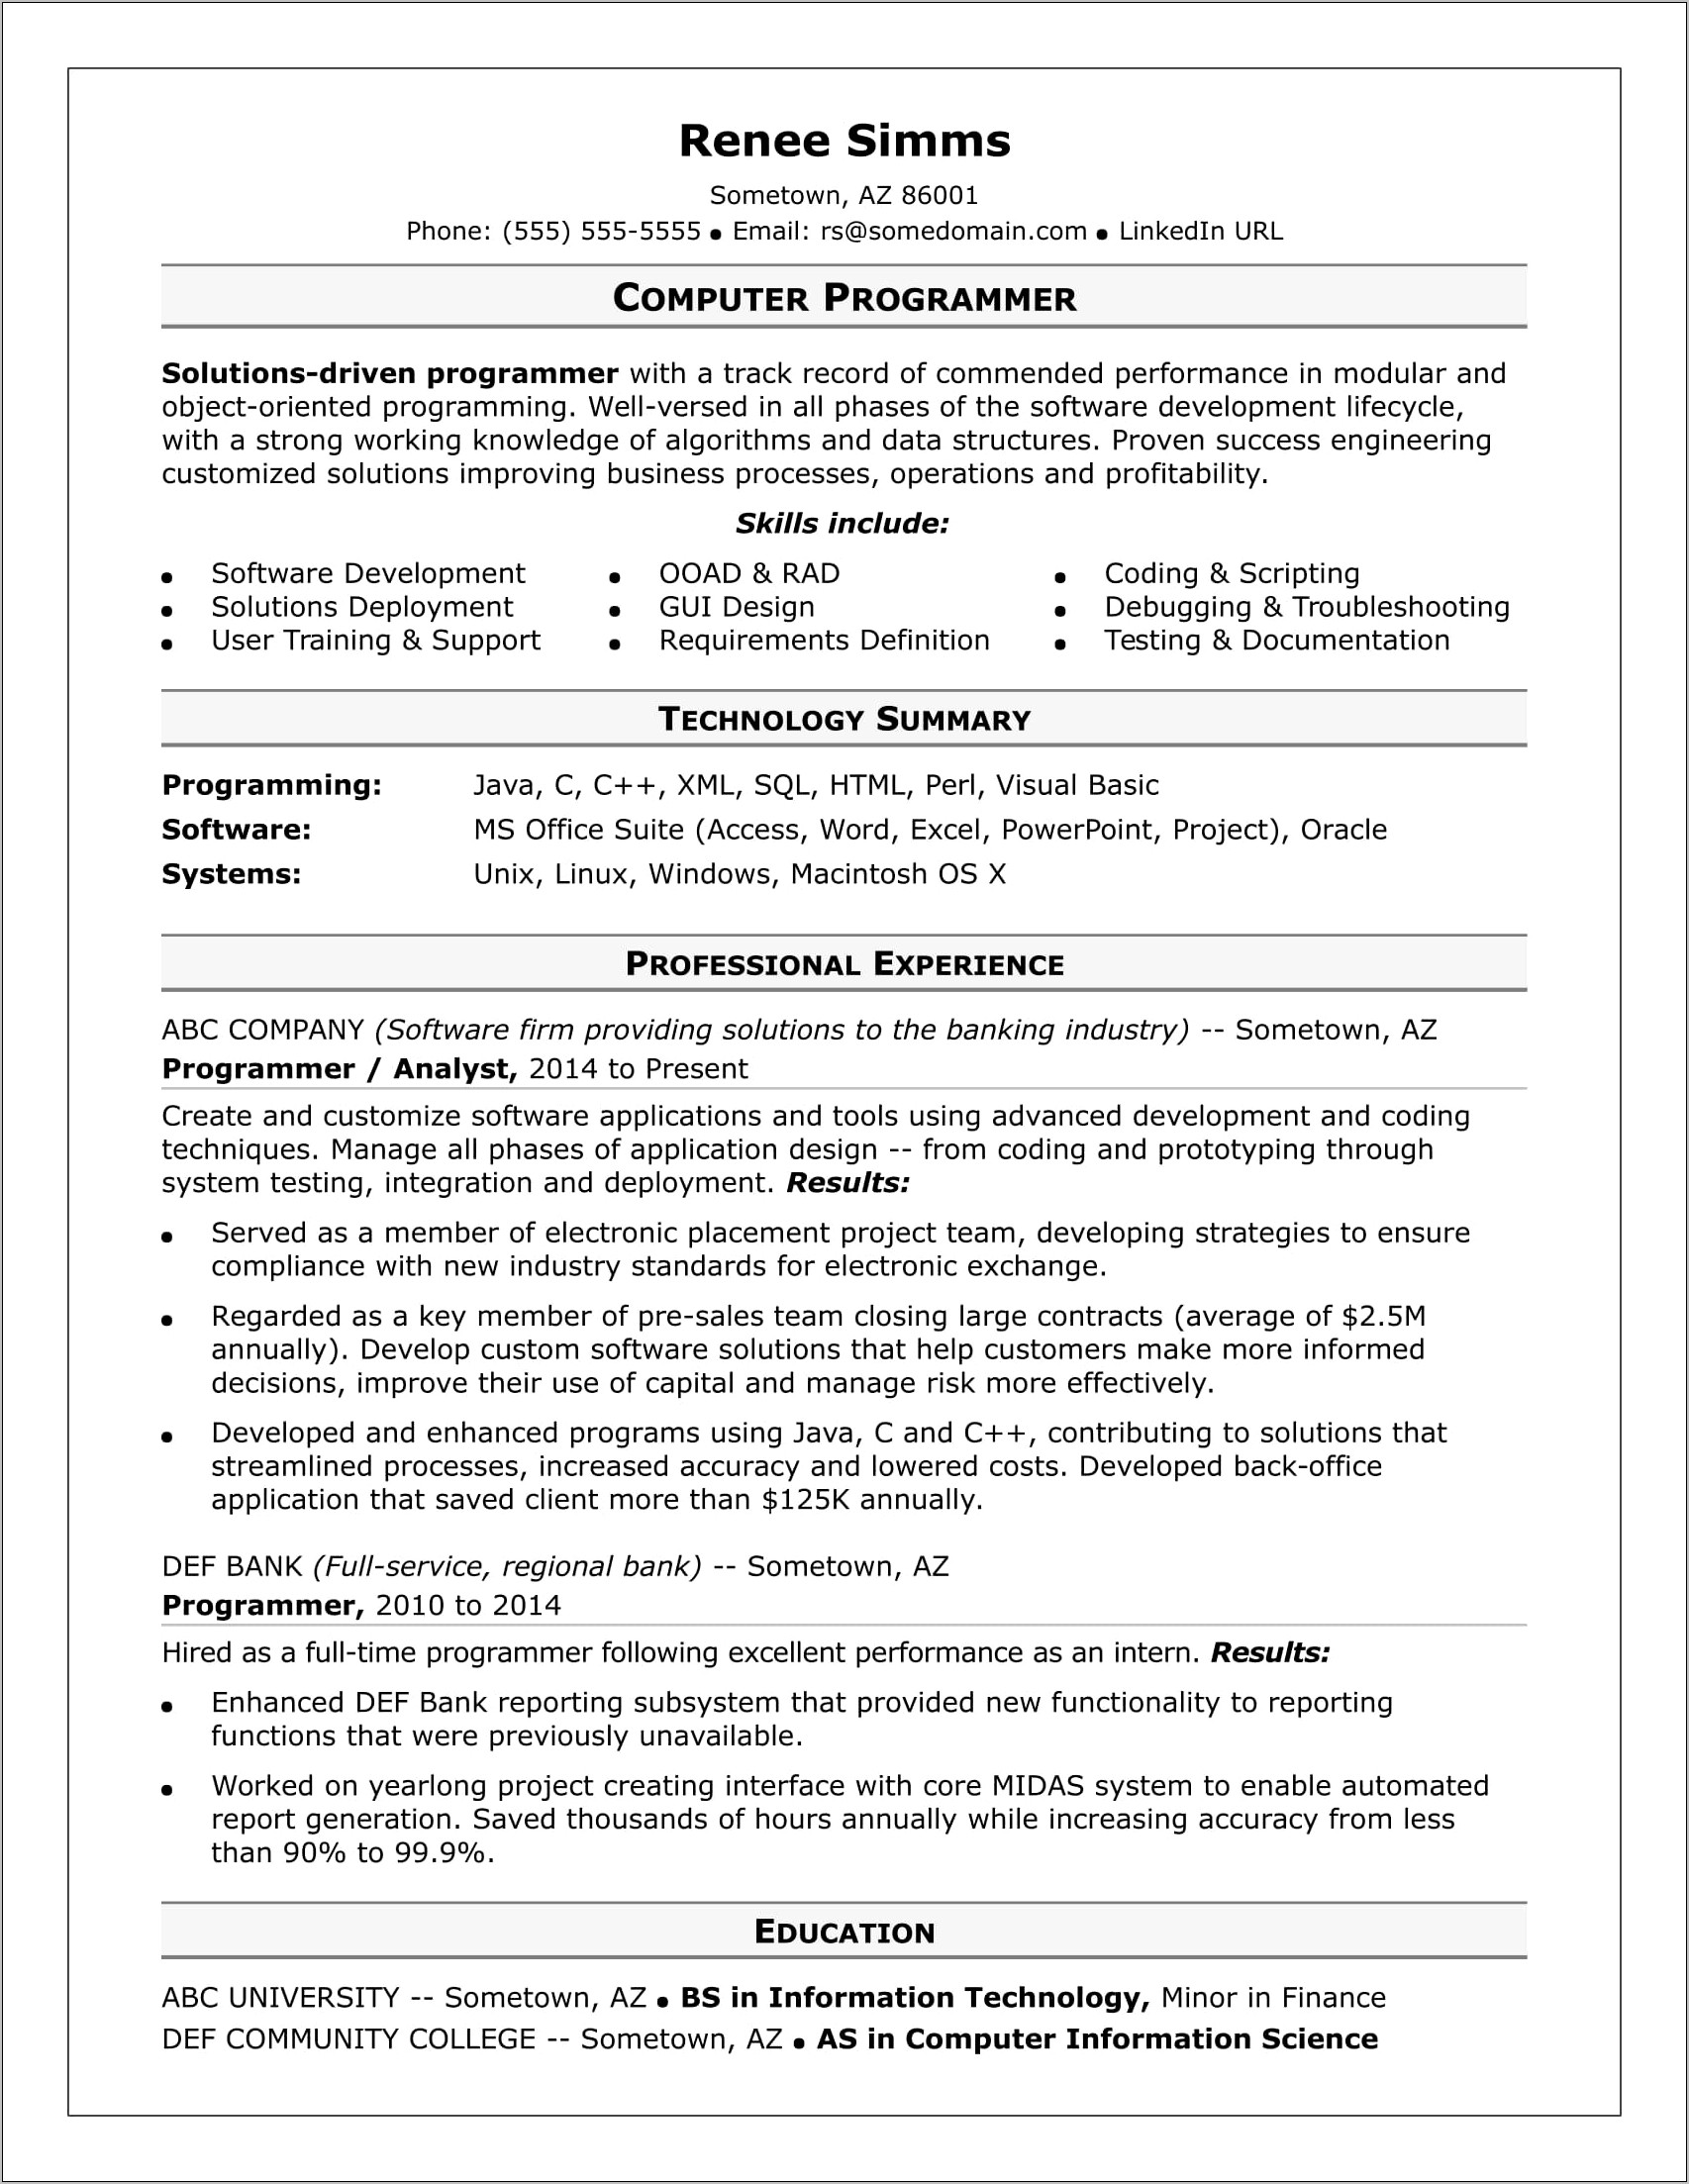 Resume For Computer Jobs In California